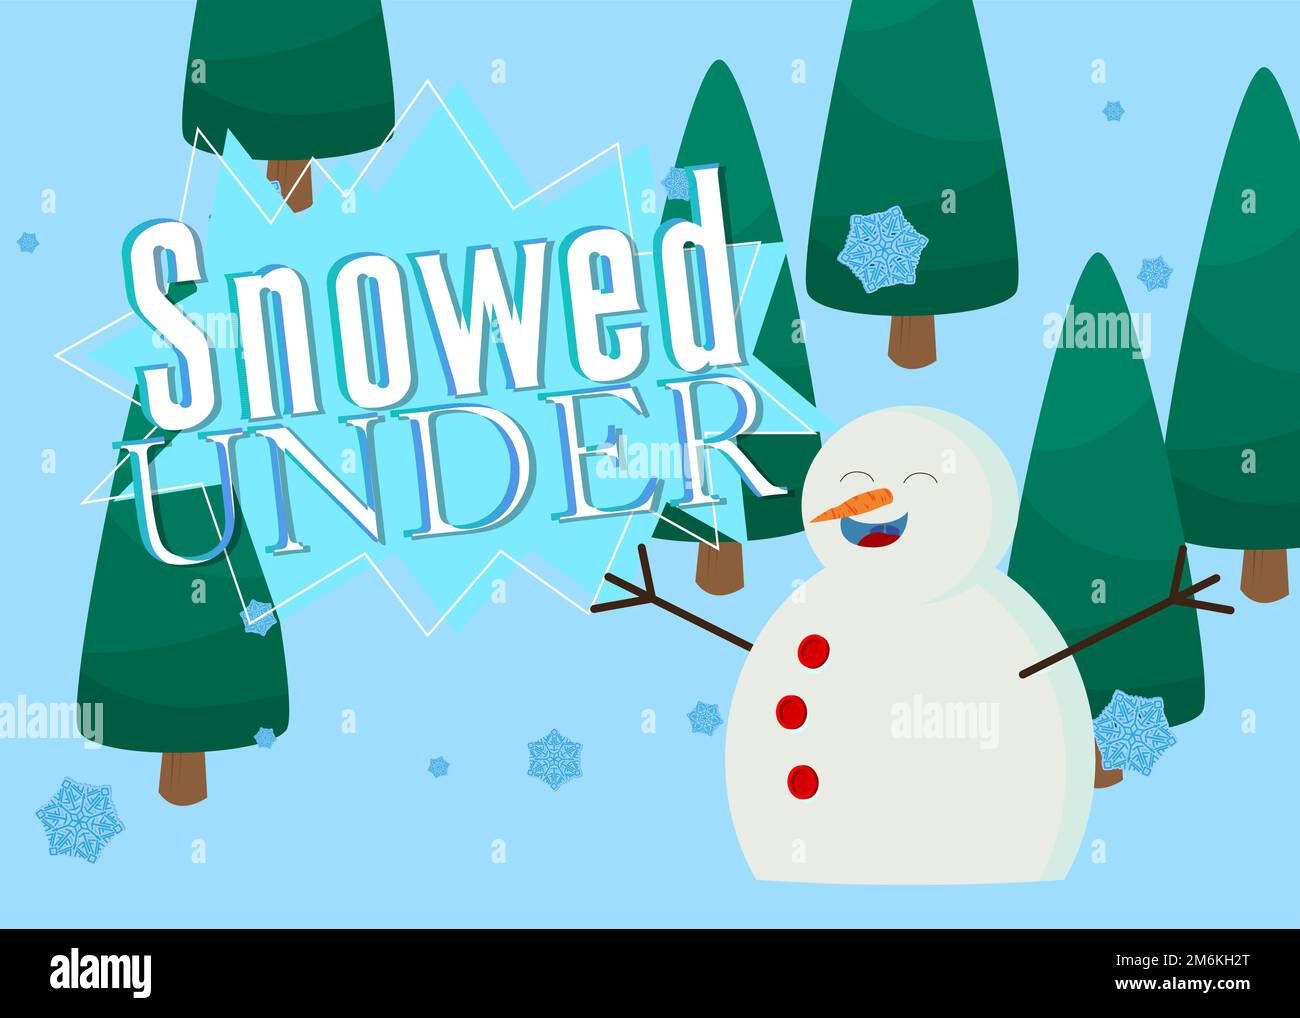 Snowman wearing hat and scarf with Snowed Under text. Card, Winter event poster, banner. Stock Vector